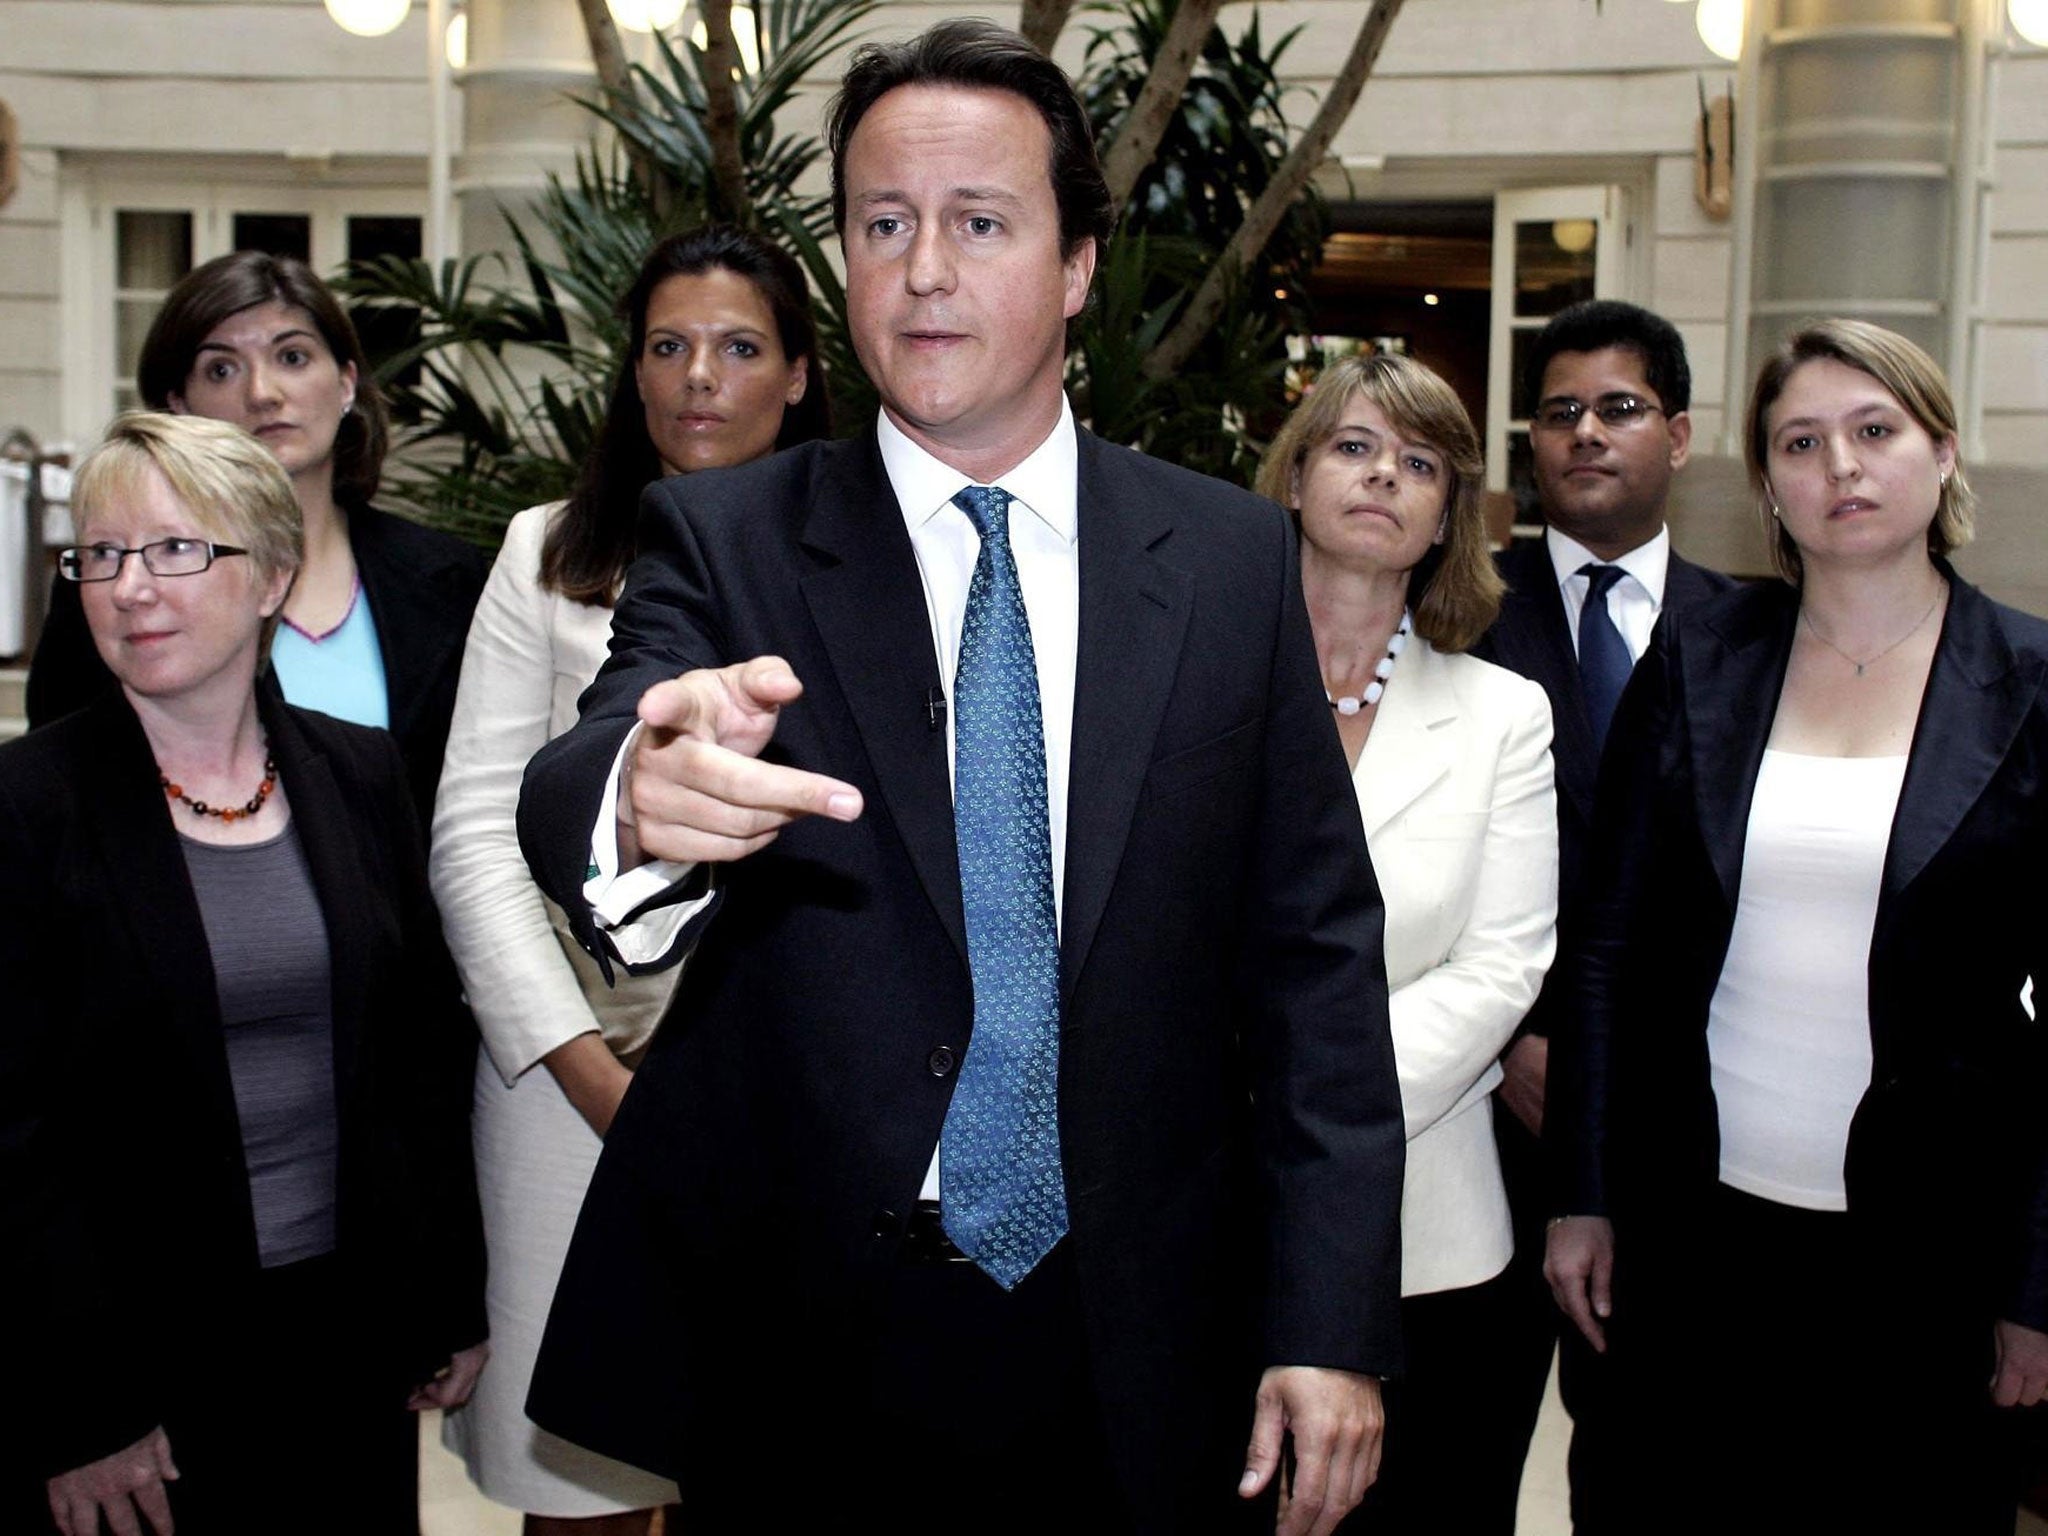 David Cameron in 2006, with candidates for the 2010 election, announcing a drive for more women to be selected